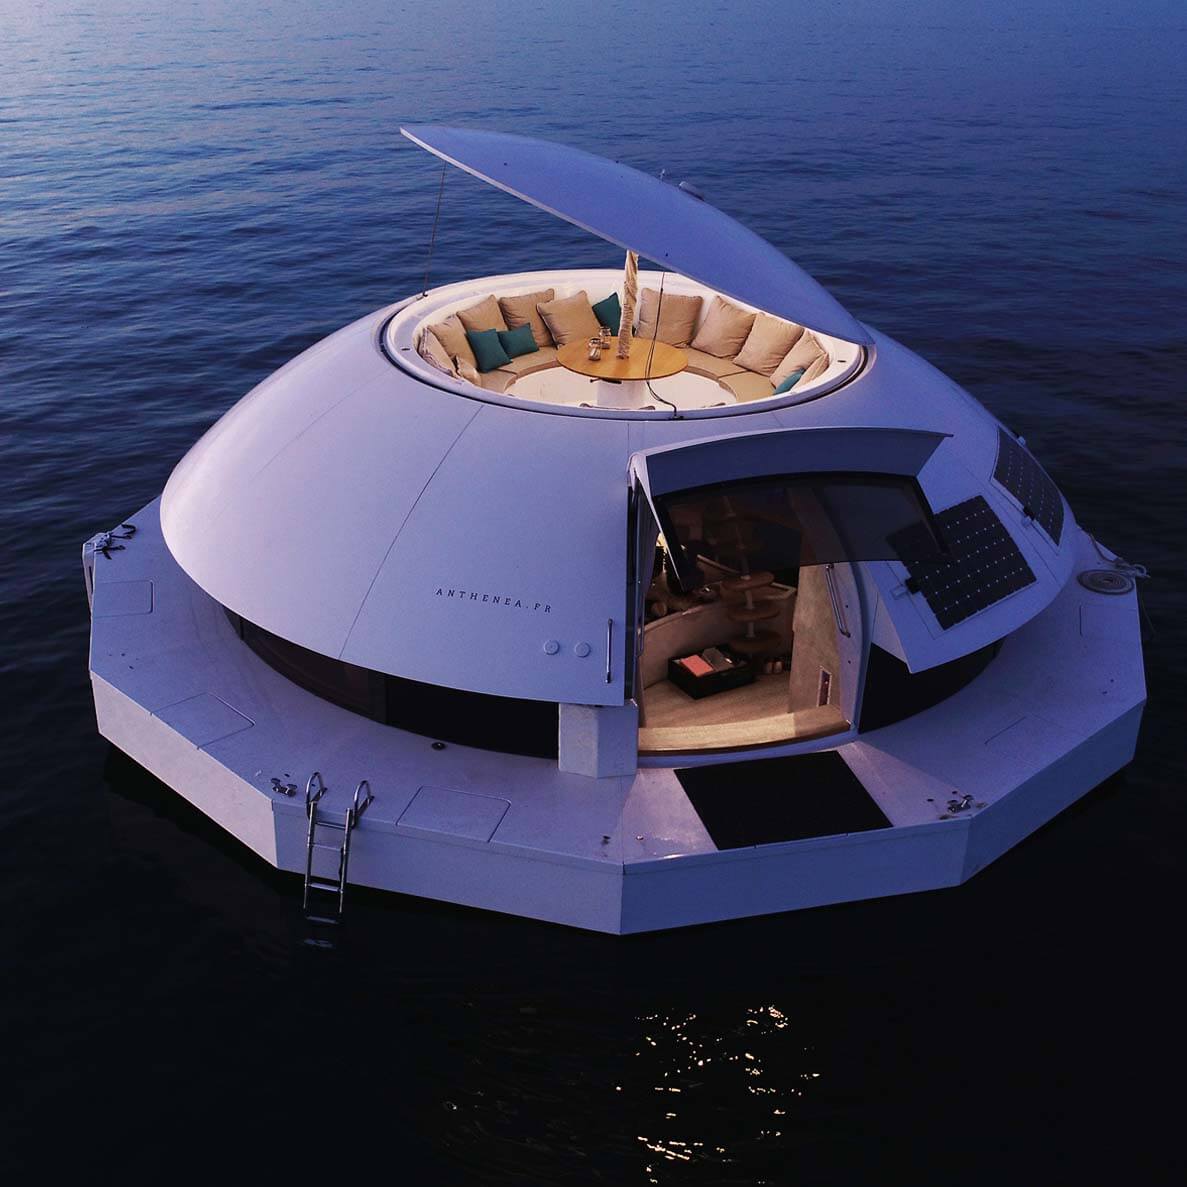 The Anthénea floating hotel